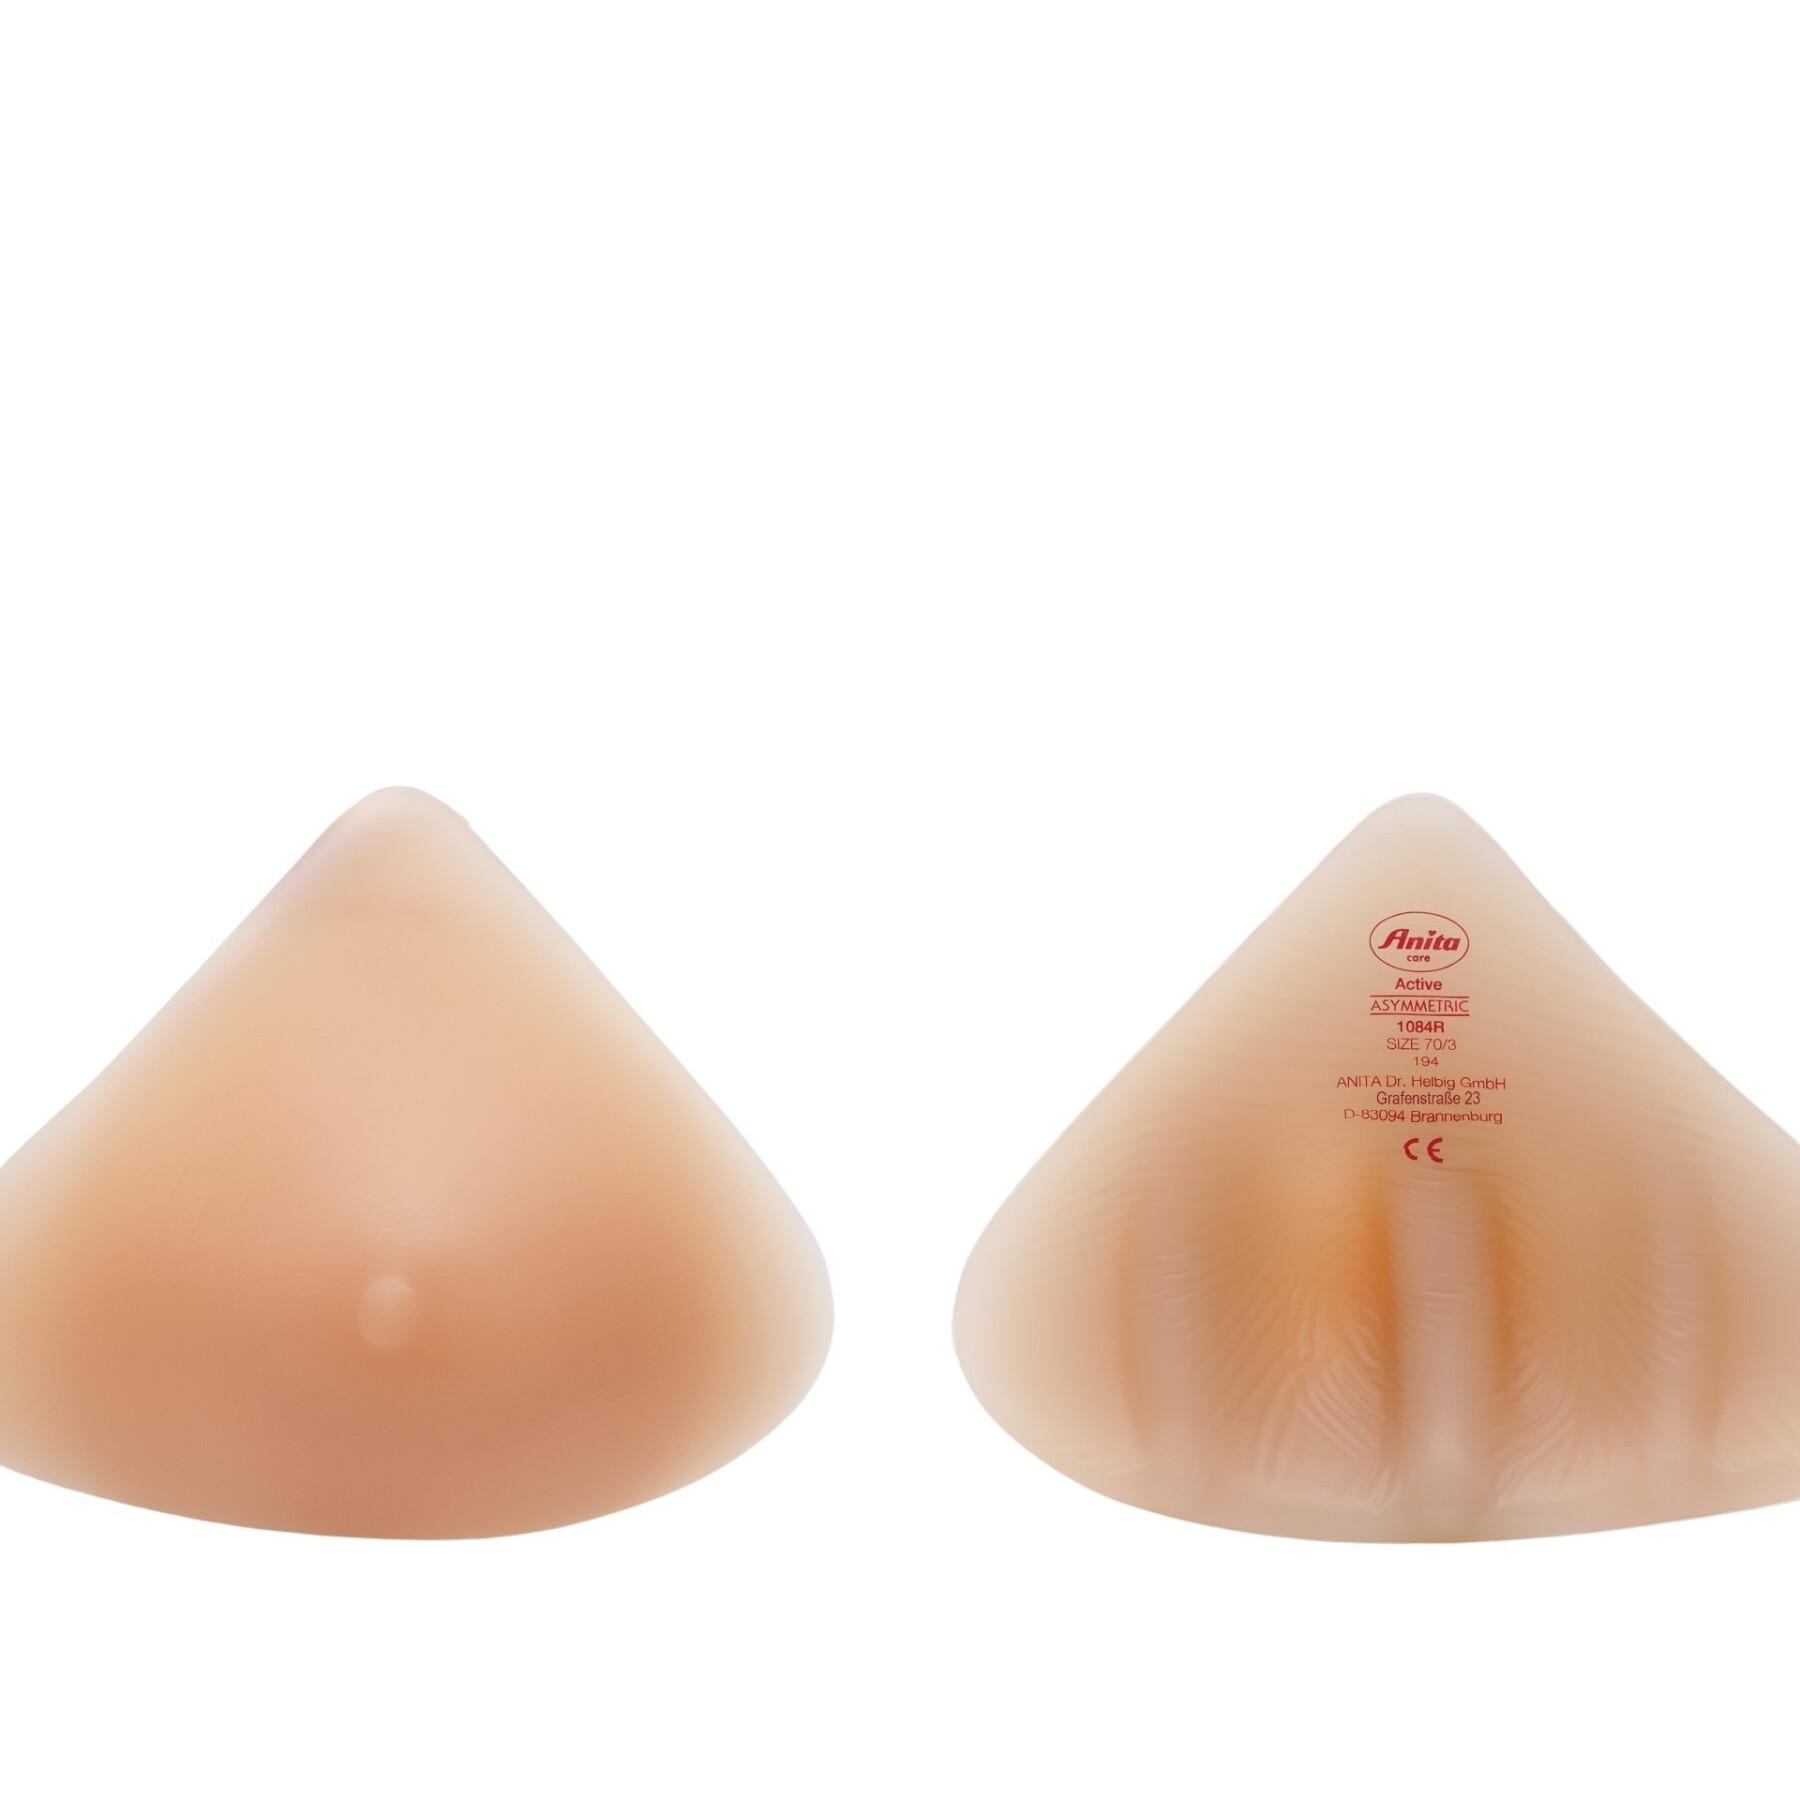 Right breast prosthesis for women Anita Active